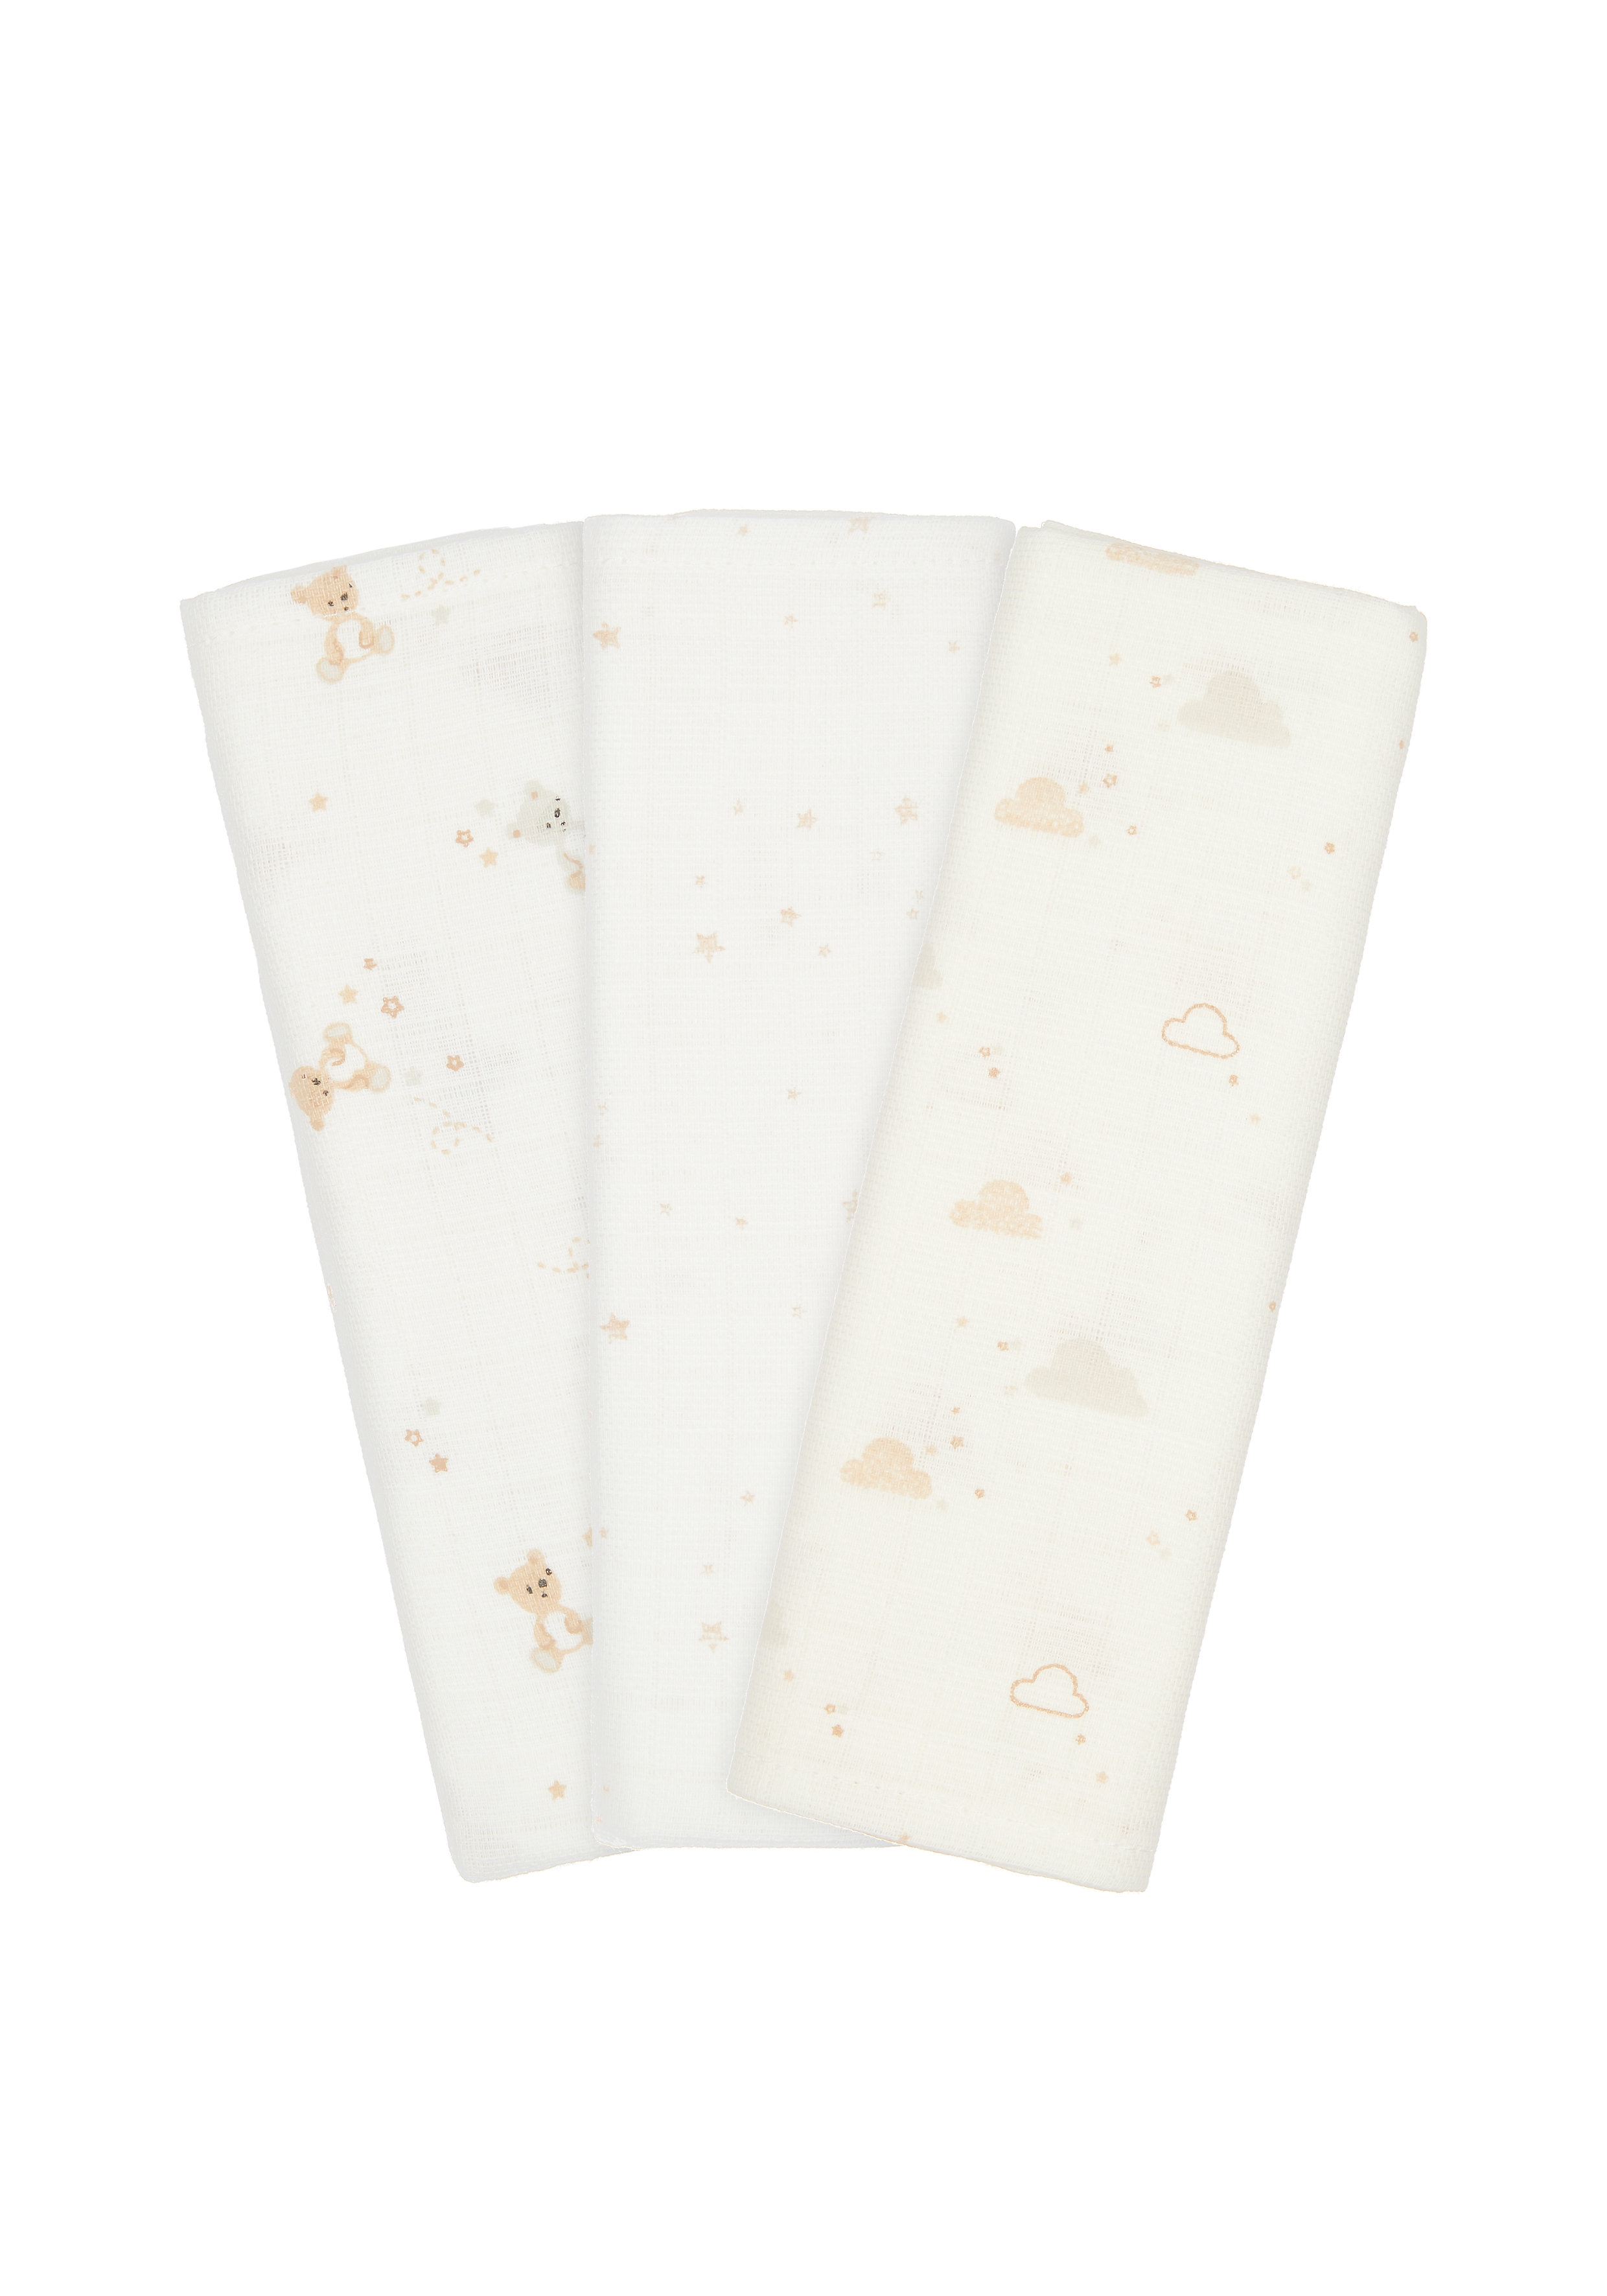 Mothercare Little & Loved Pack of 3 Muslins Cream